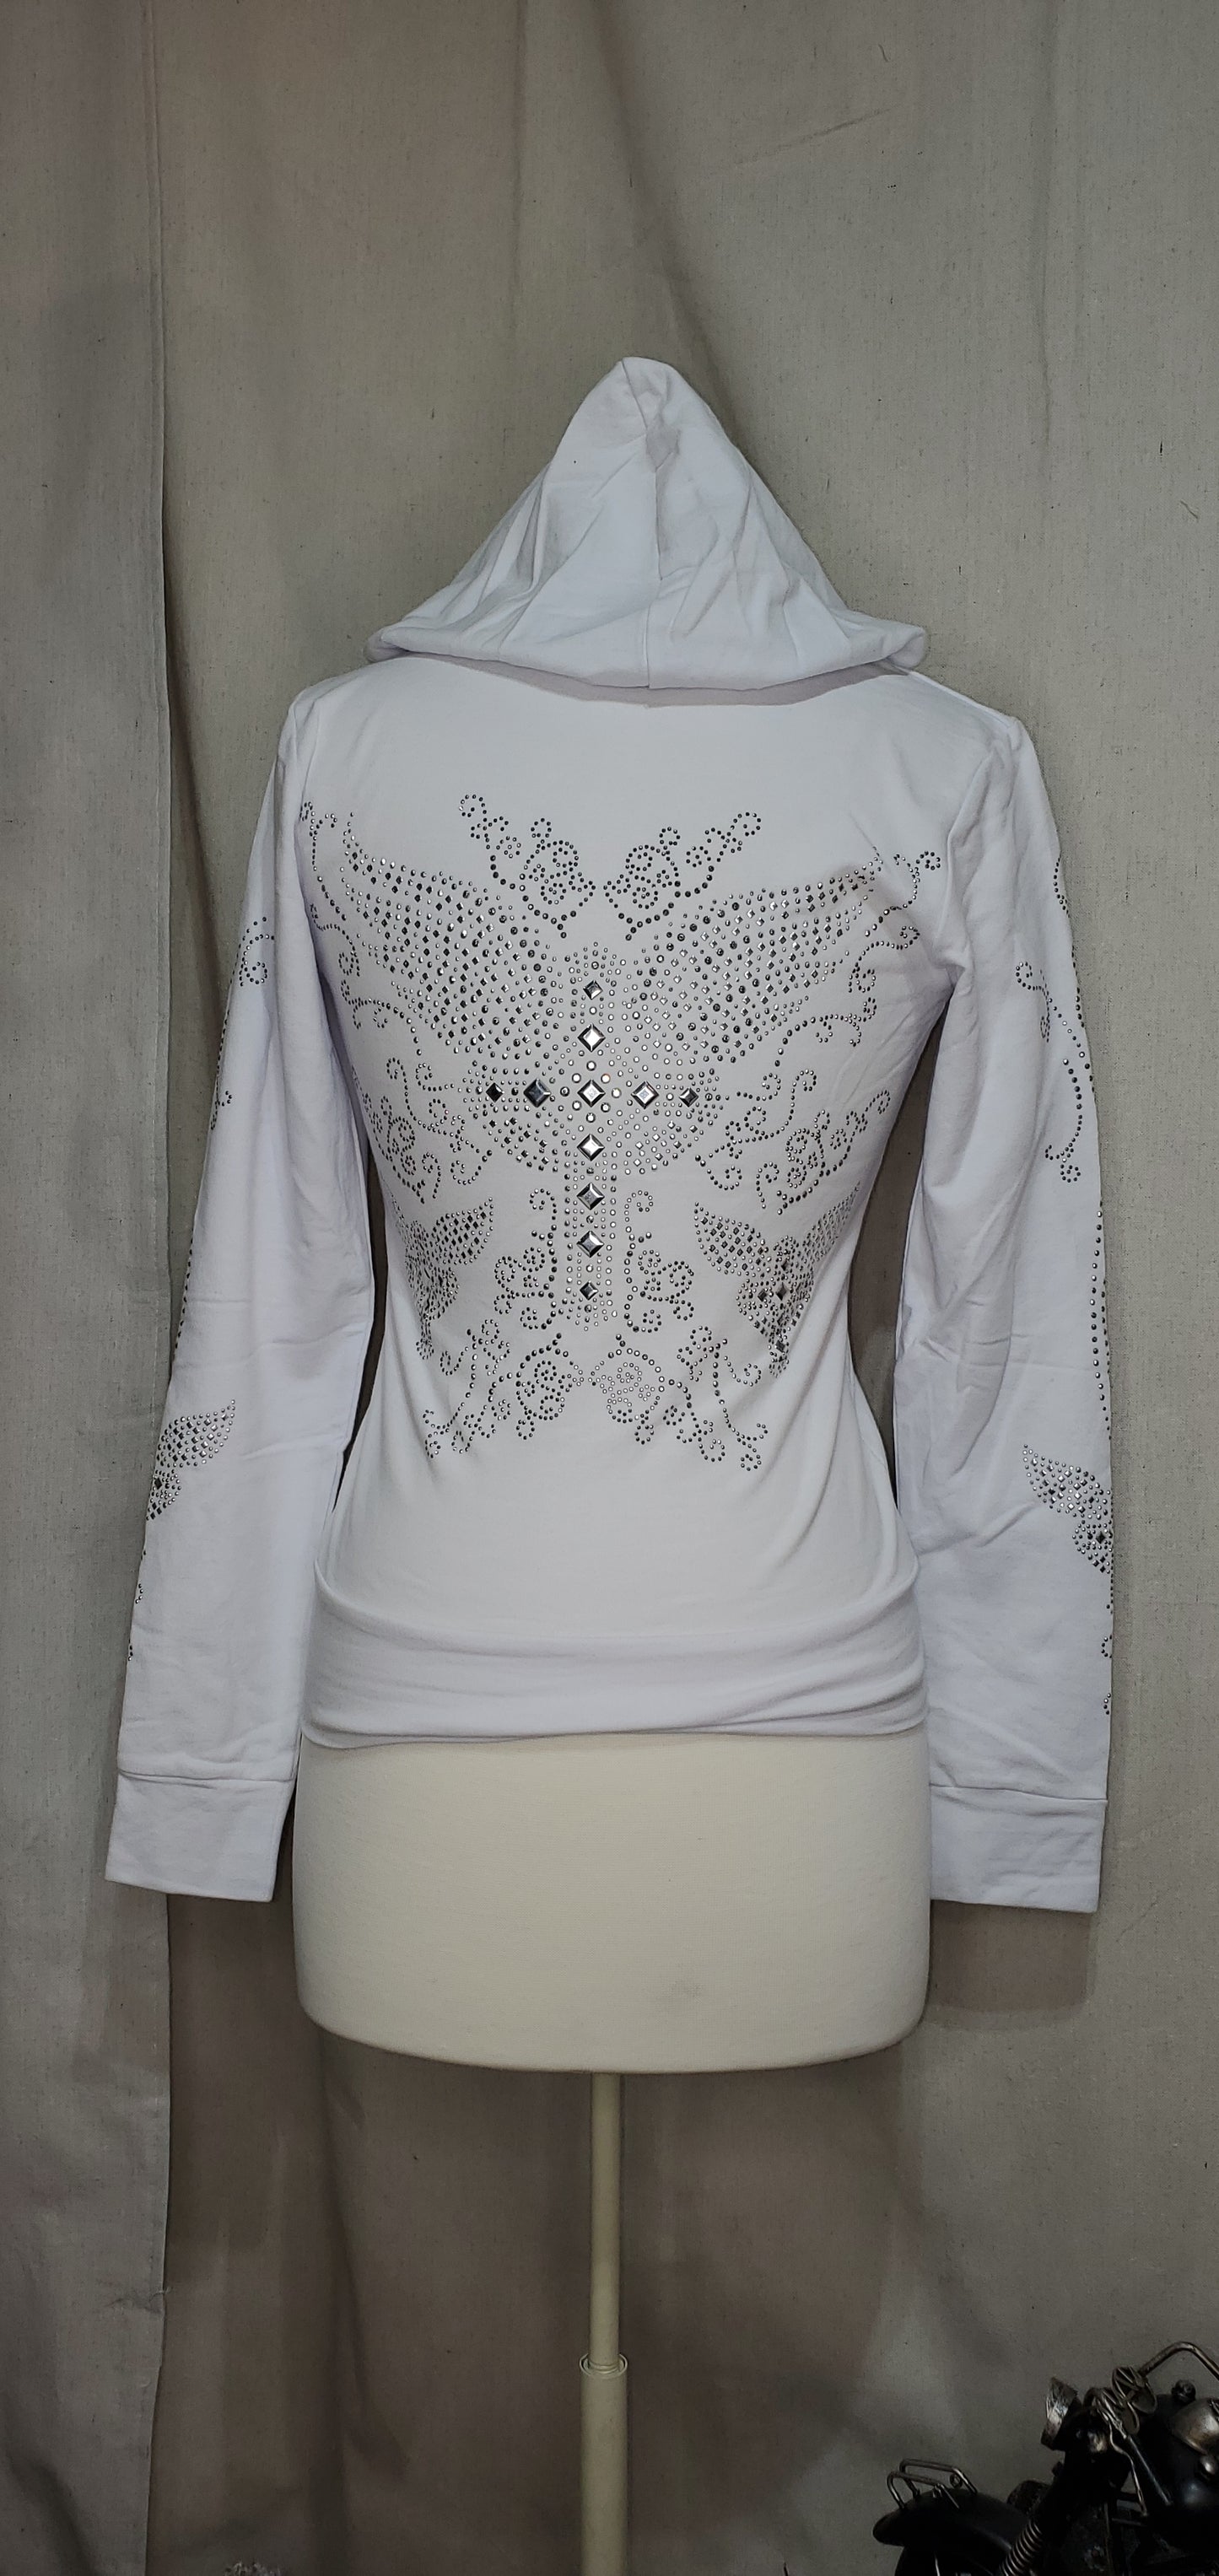 White Cross and Wings French Terry Jacket with Rhinestones (bs1711)